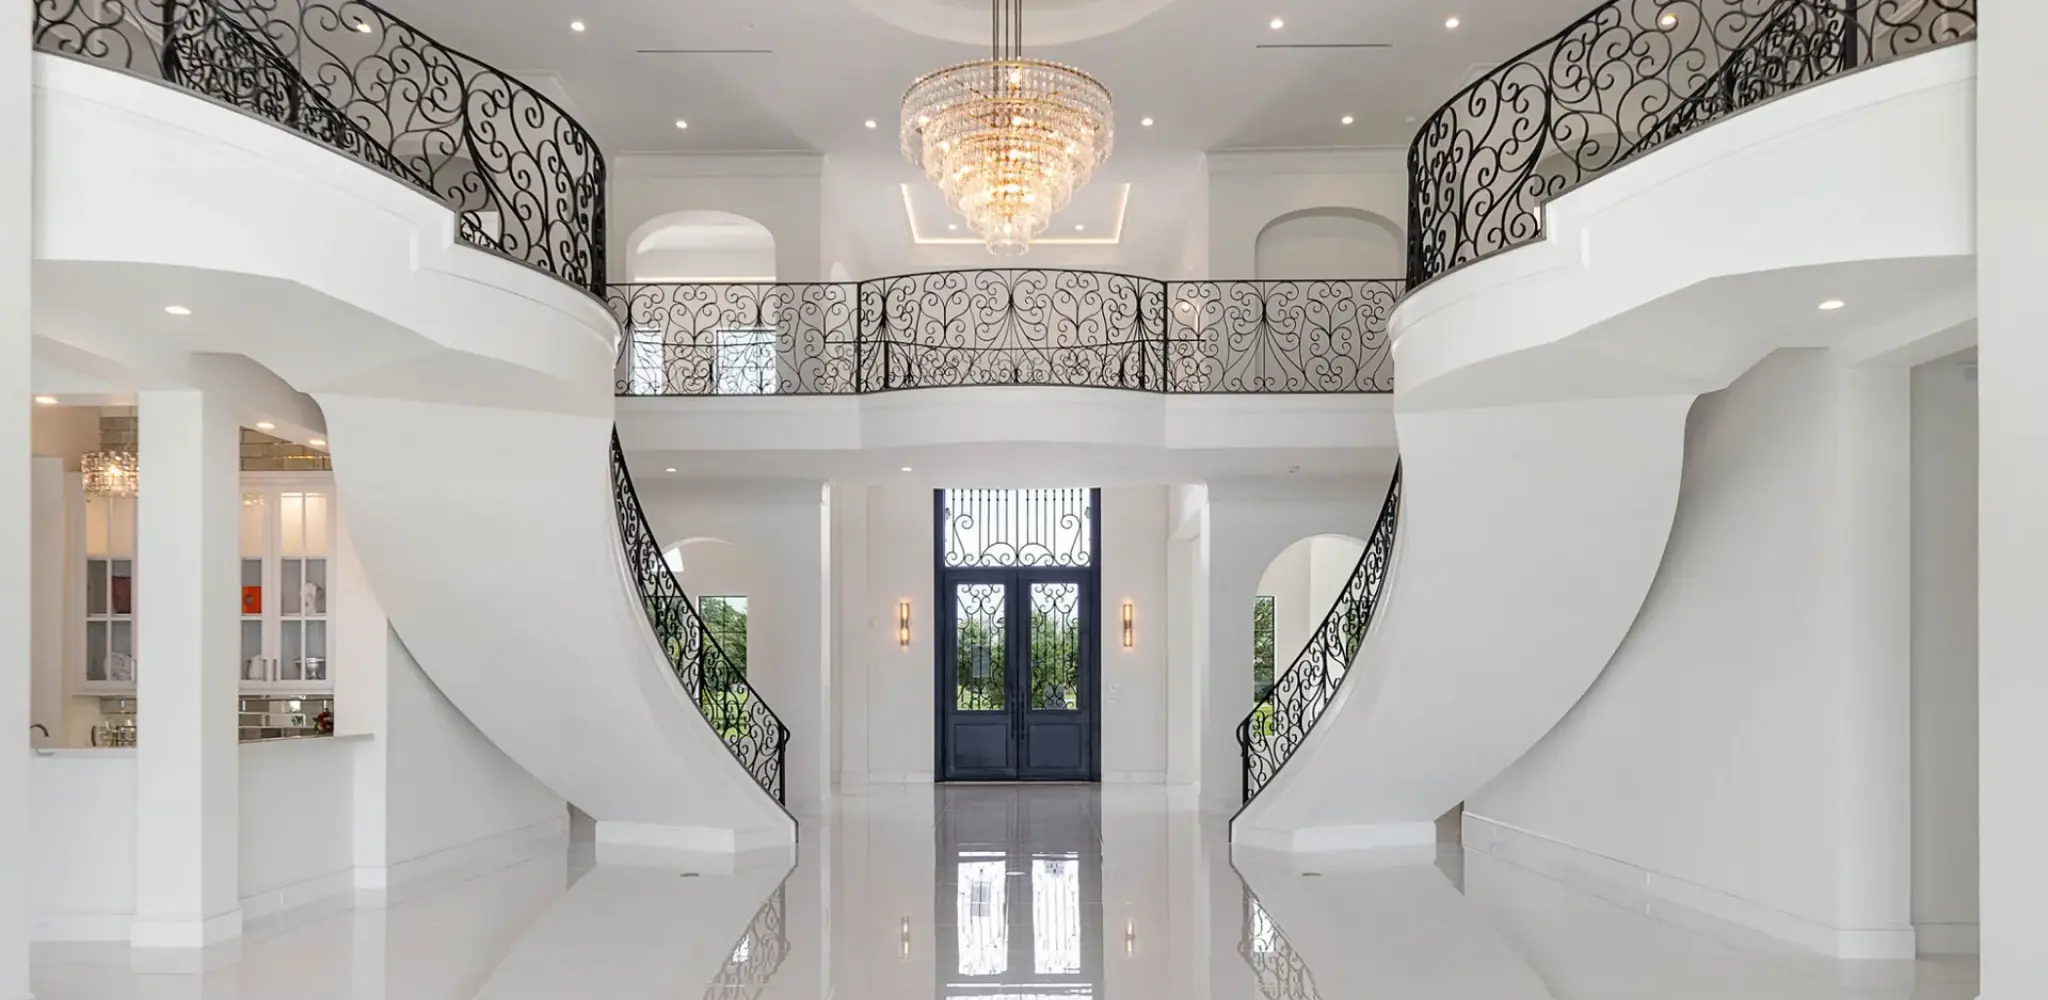 Luxury homes in the U.S. for real estate investment